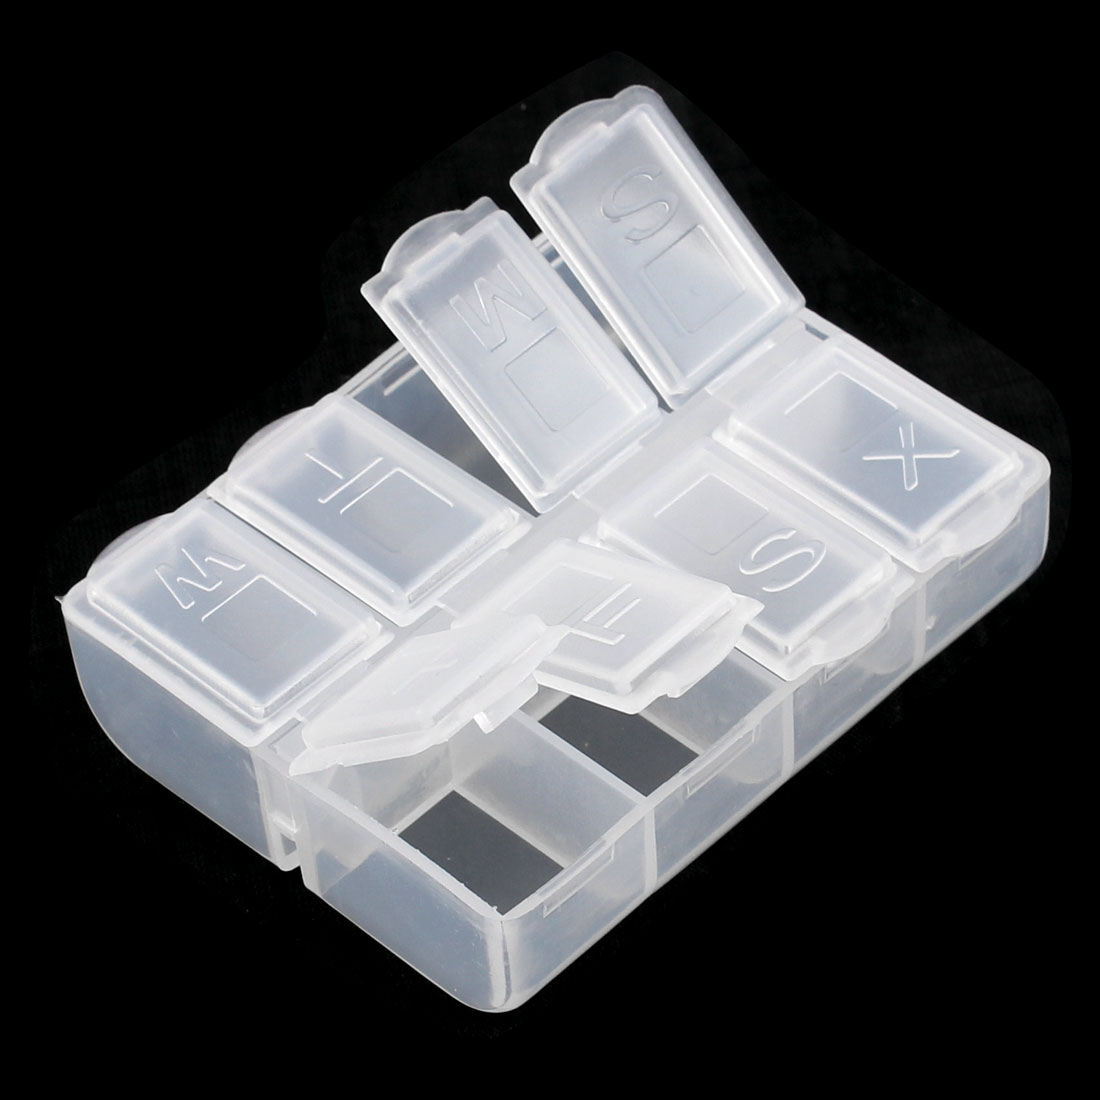 Unique Bargains Weekly 8 Compartments Pill Box Tablet Holder Case Organizer Container Clear